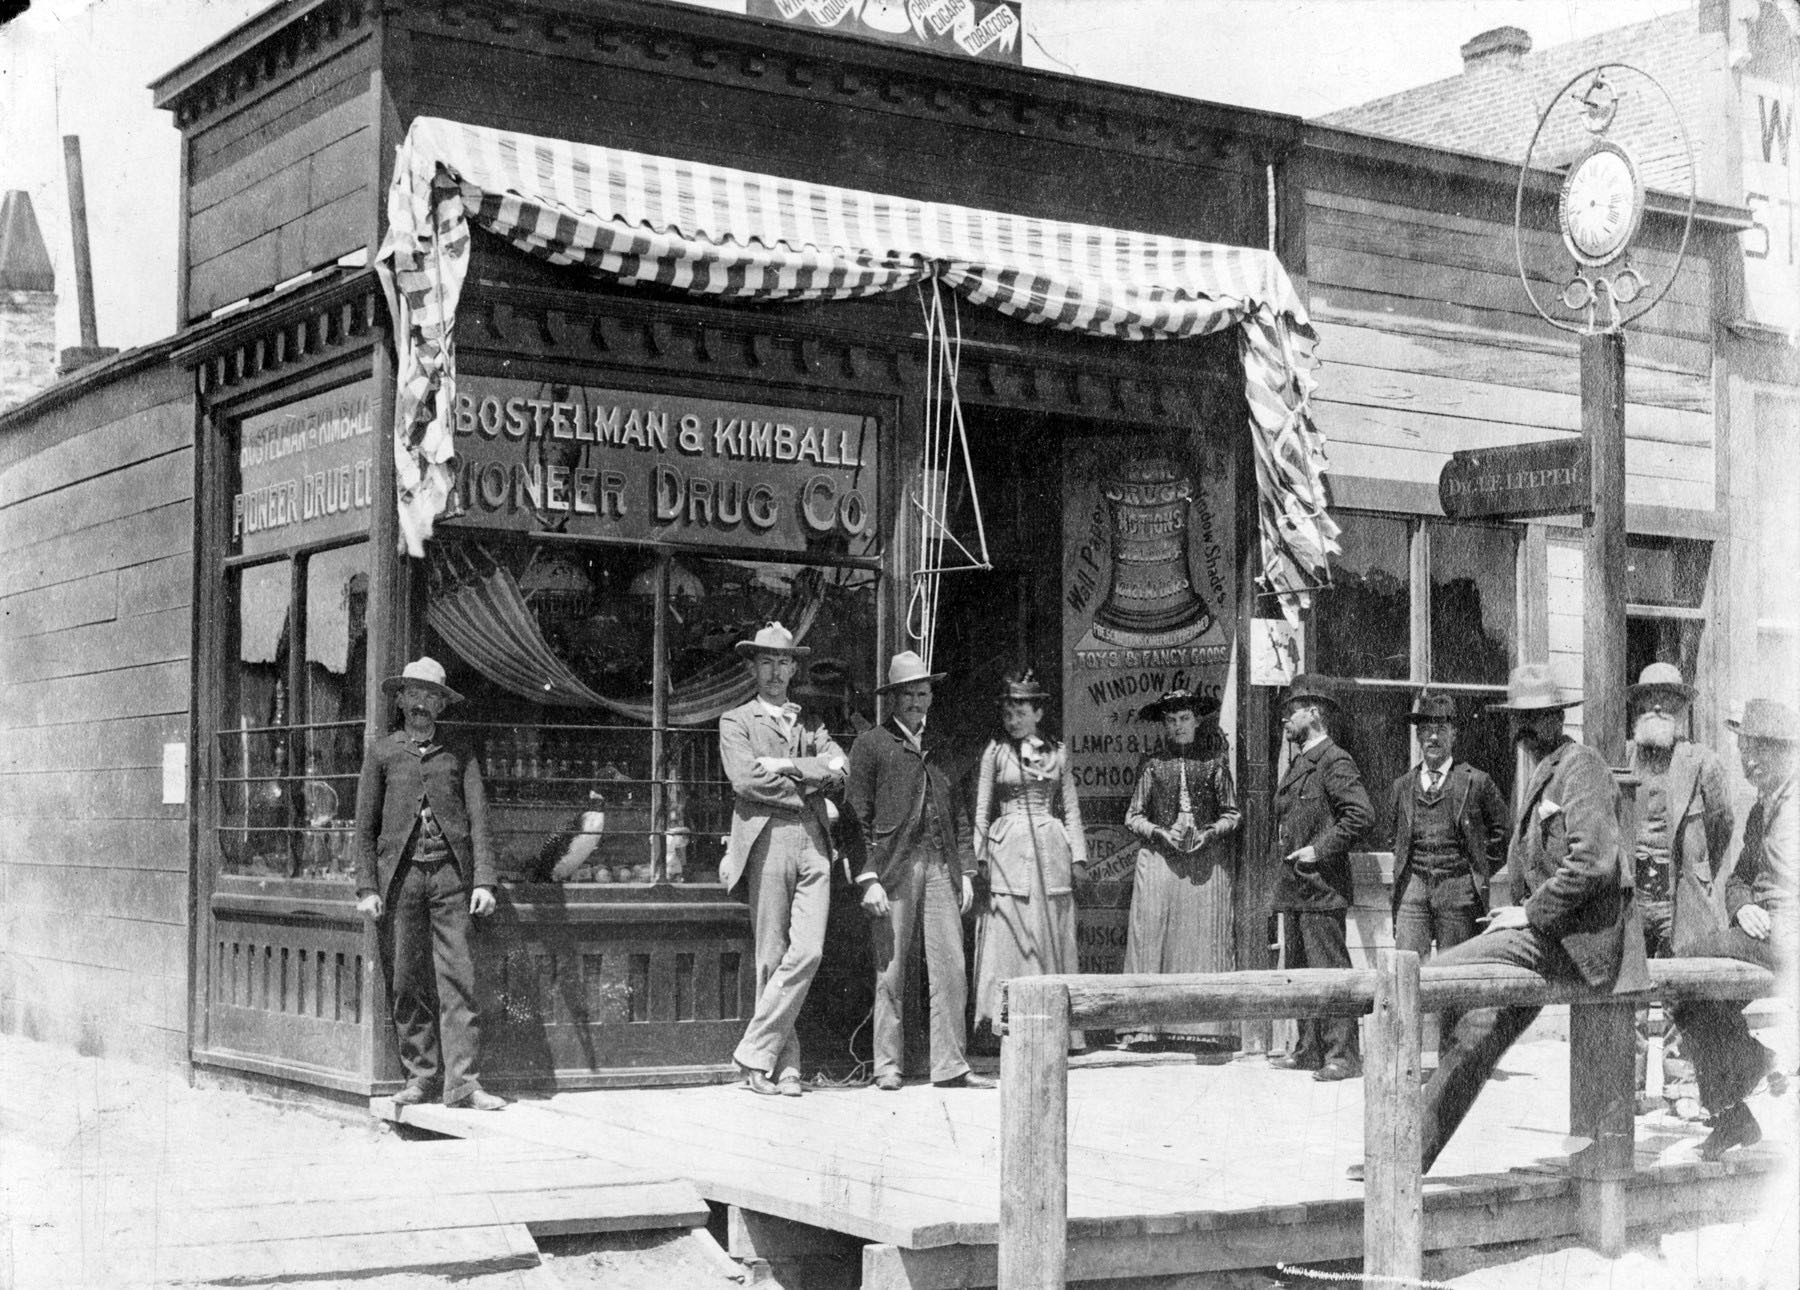 Building Casper- A Historical Timeline in Downtown Commercial Businesses